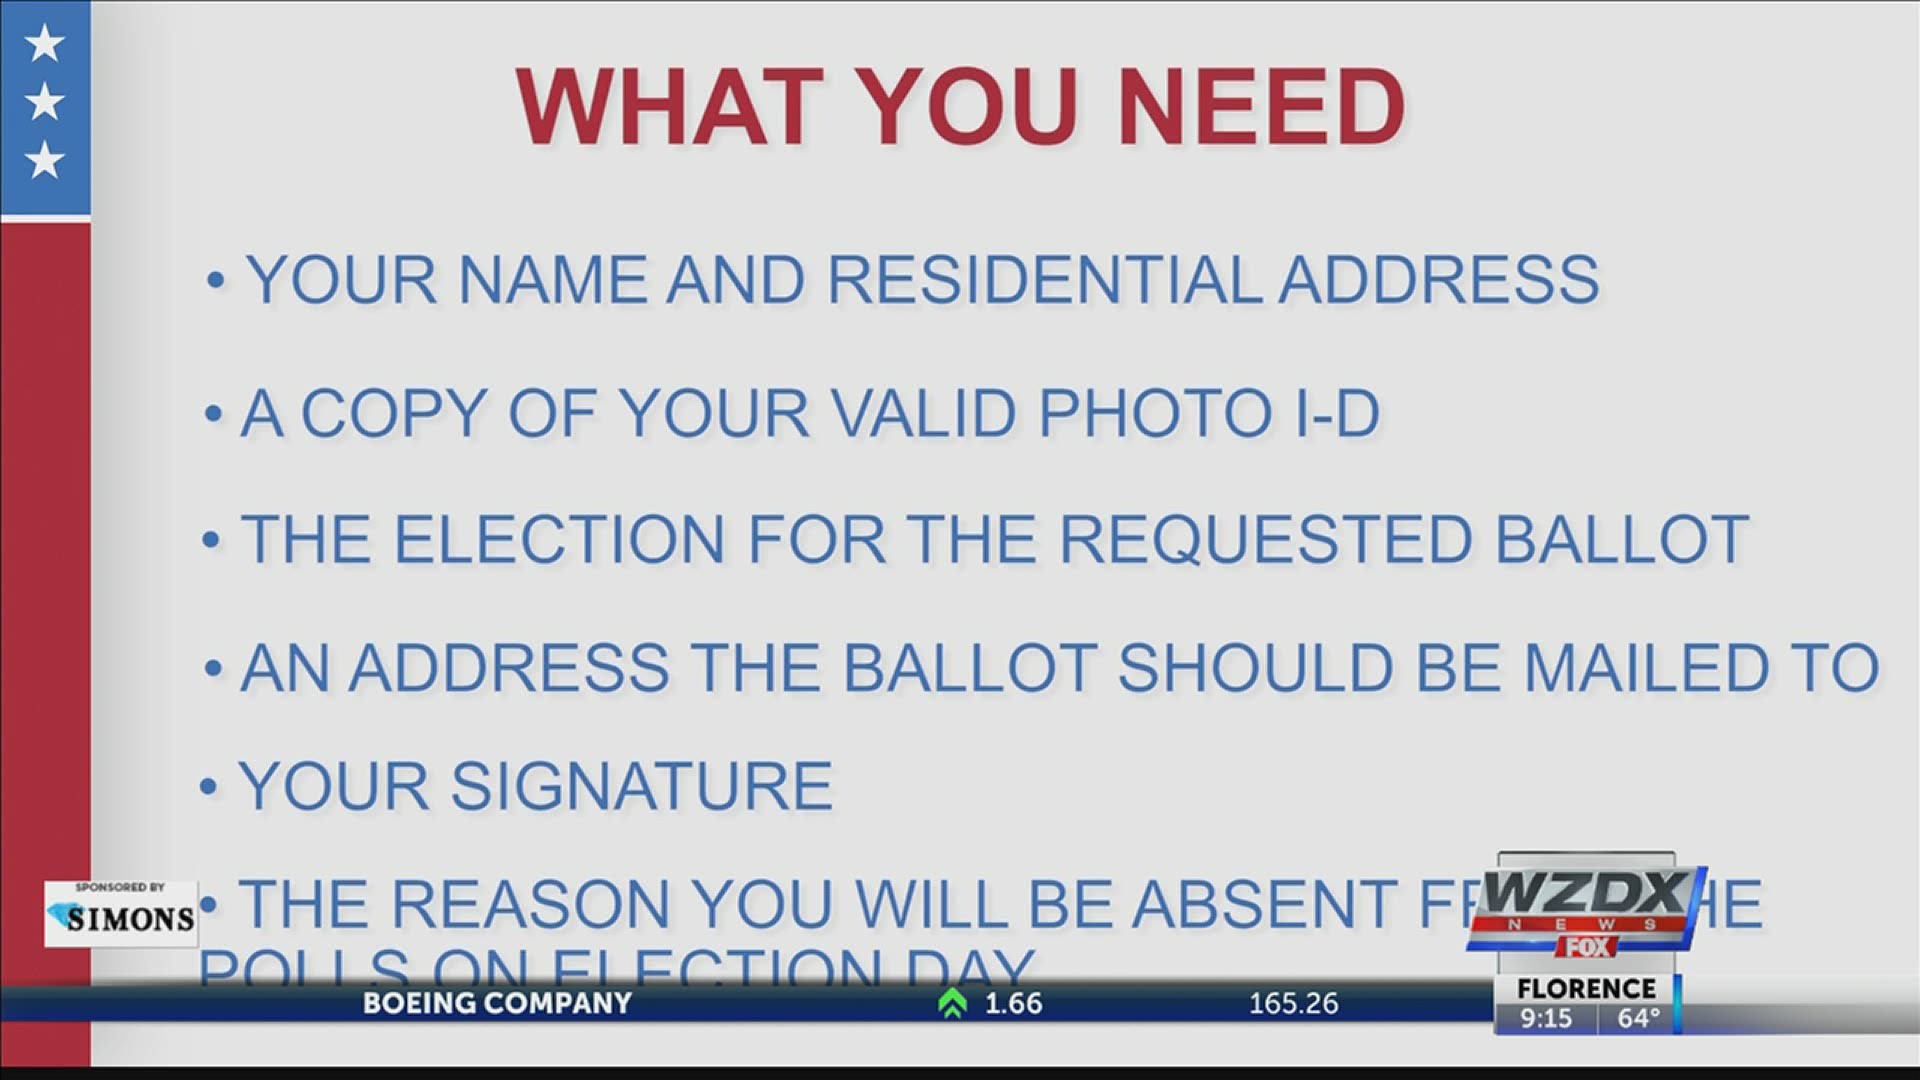 When you apply for an absentee ballot, it's important you use your specific county's absentee voter application.